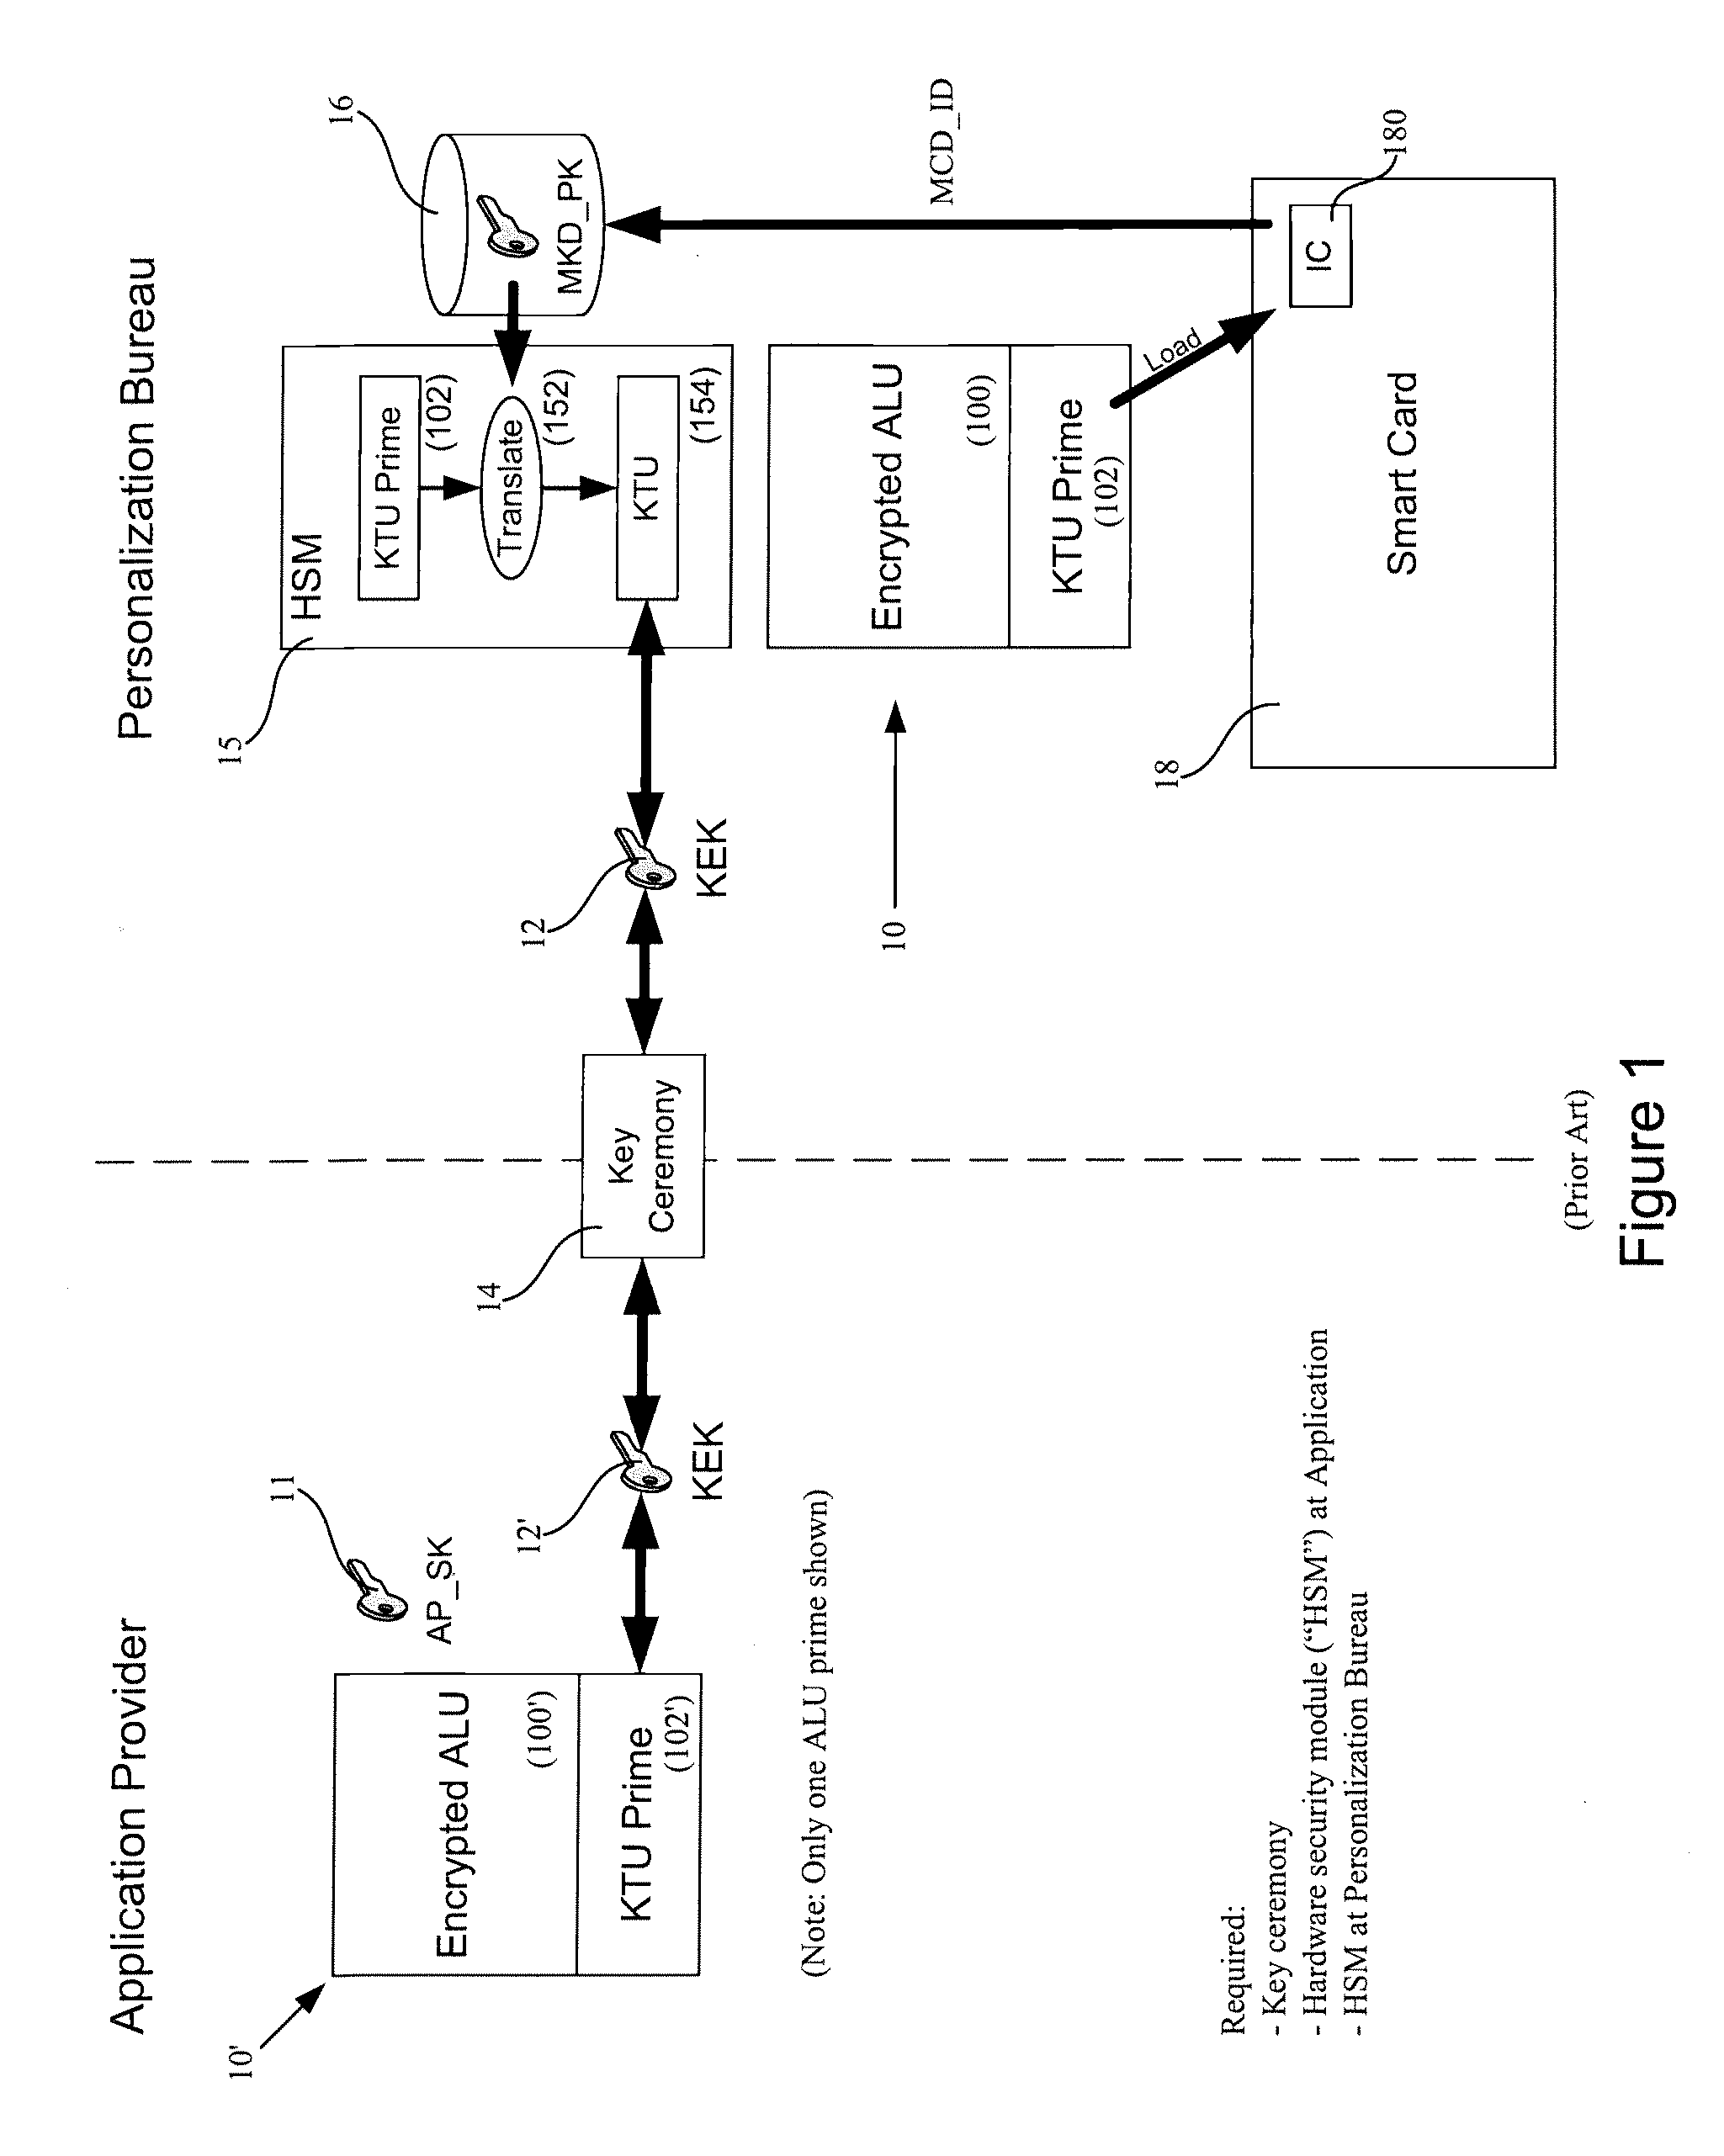 Methods and systems for IC card application loading